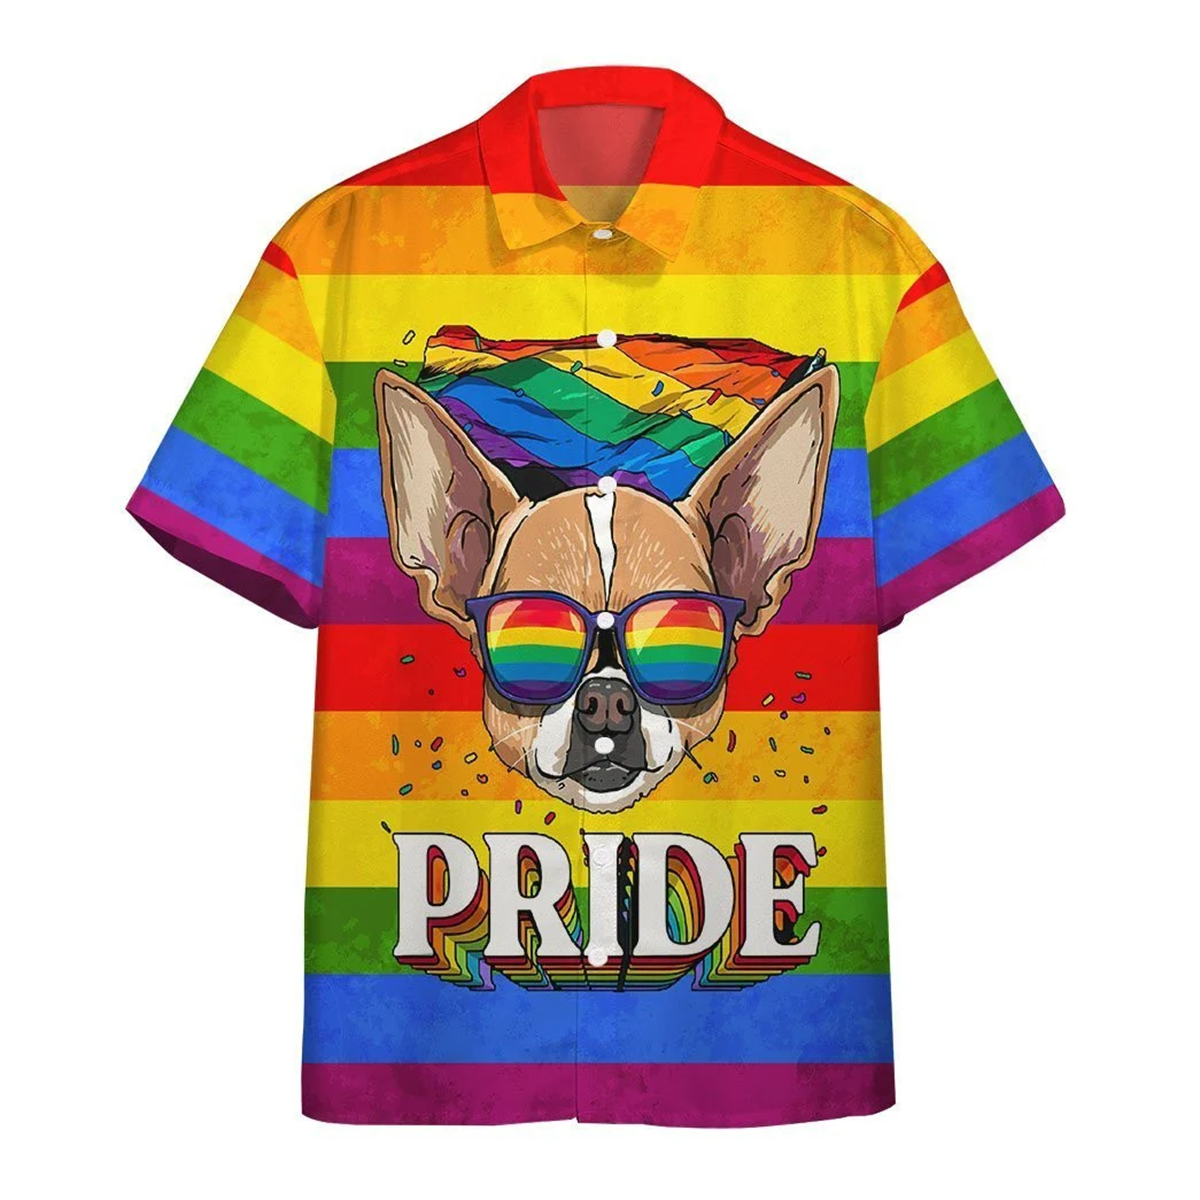 Colorful Pride Shirt For Transgender/ Awesome Background Design Hawaiian Shirt/ Beach Party Shirt